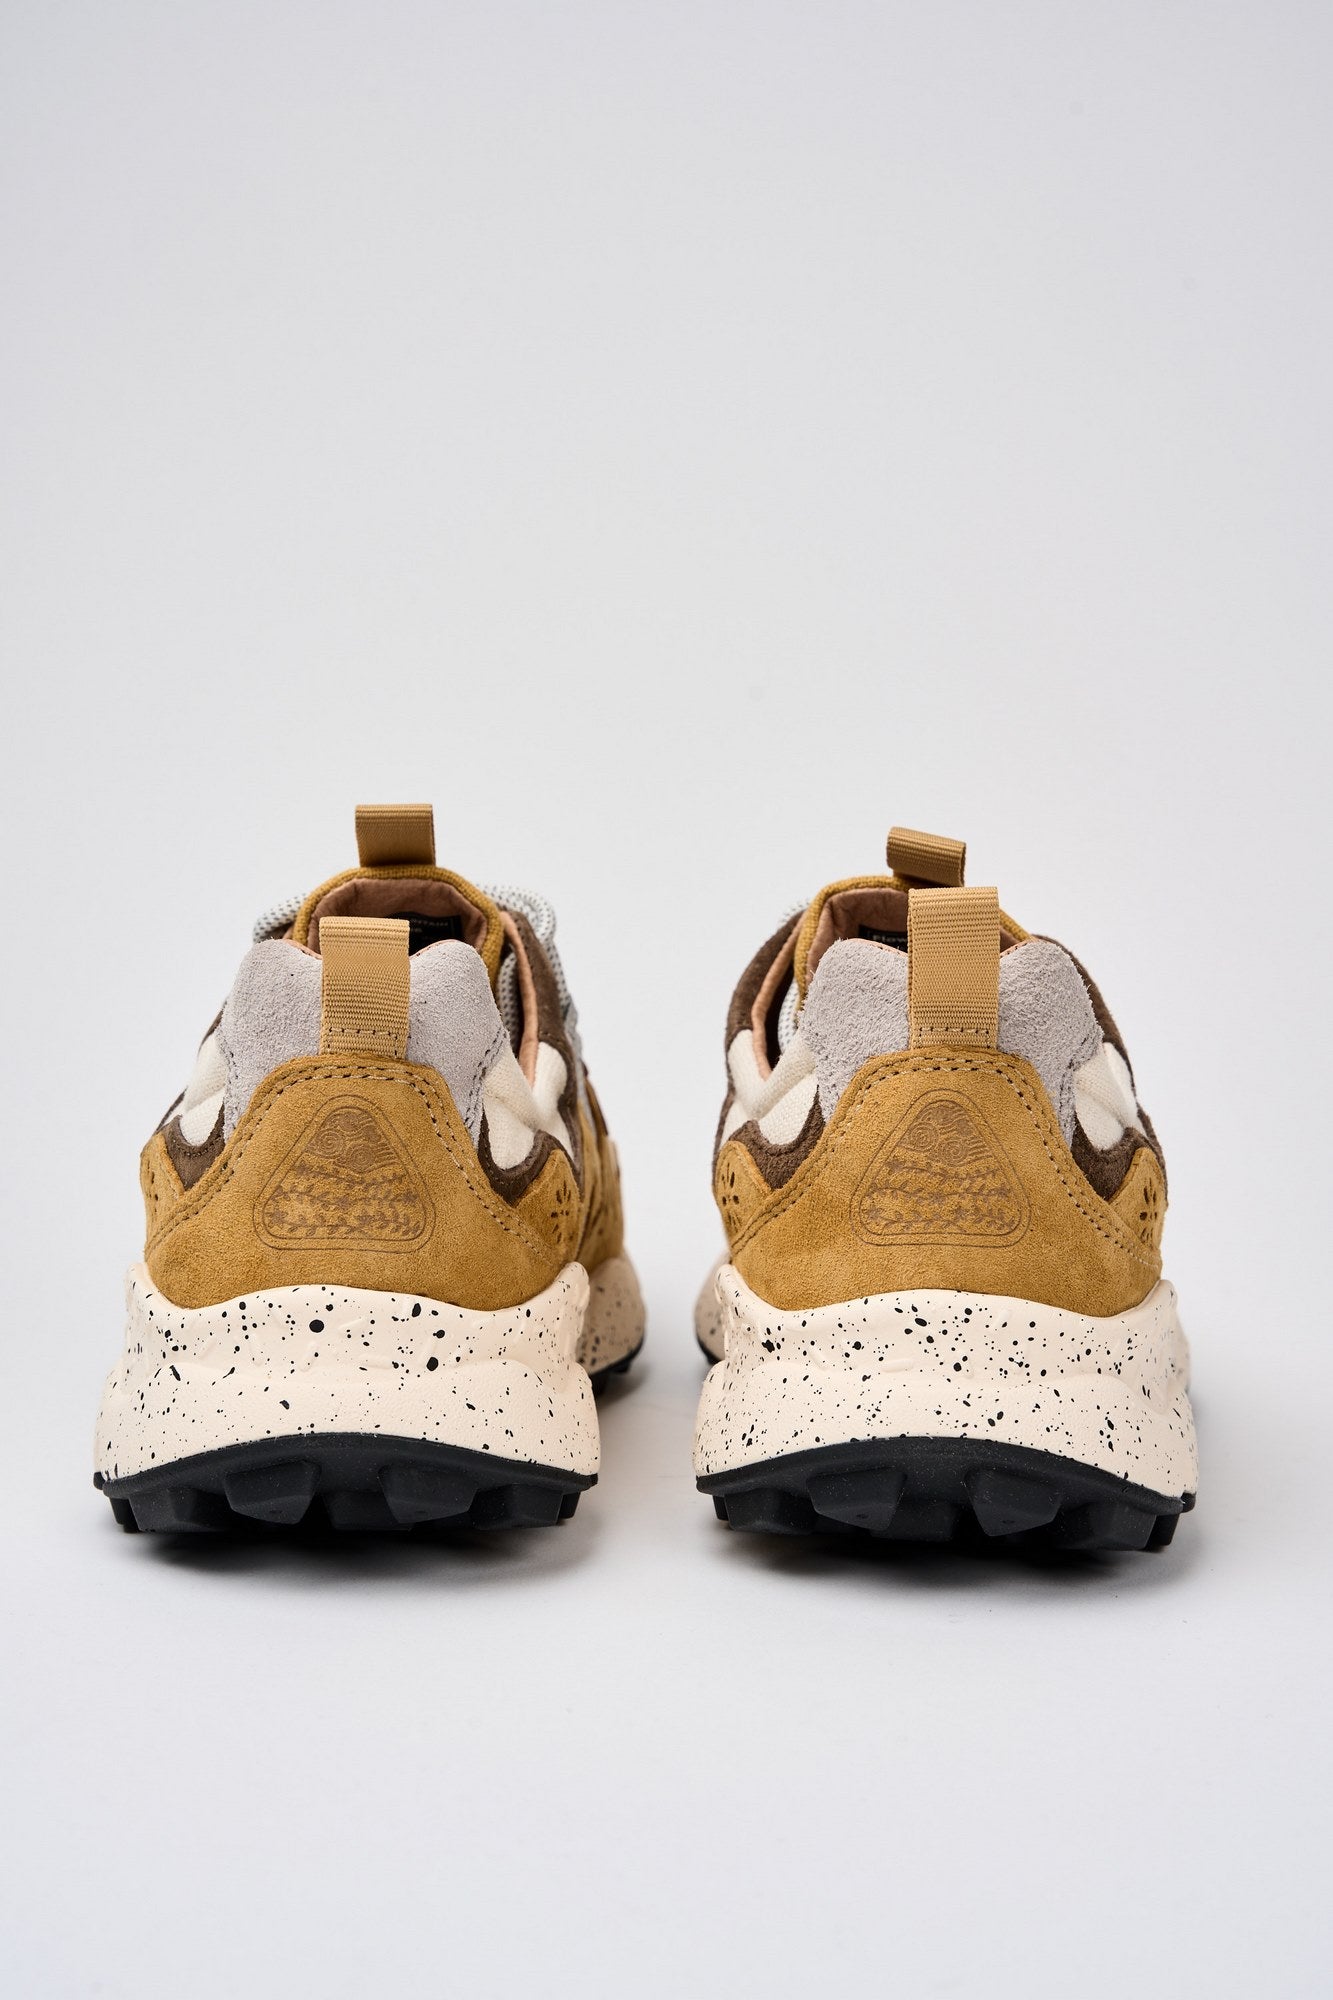 Flower Mountain Sneakers Yamano 3 Suede/Nylon Camel-6